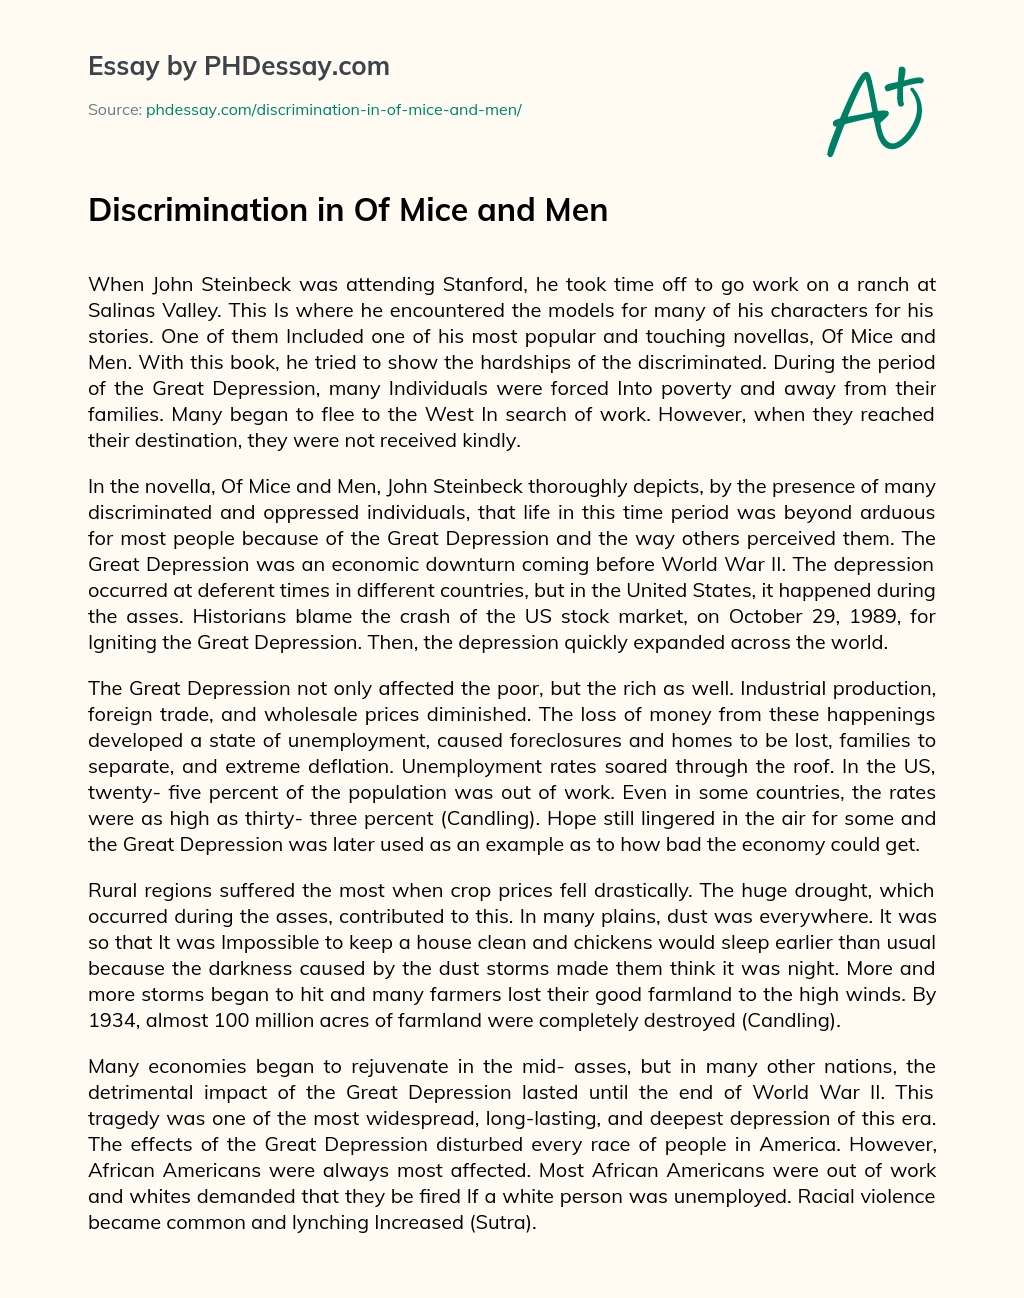 Discrimination in Of Mice and Men essay